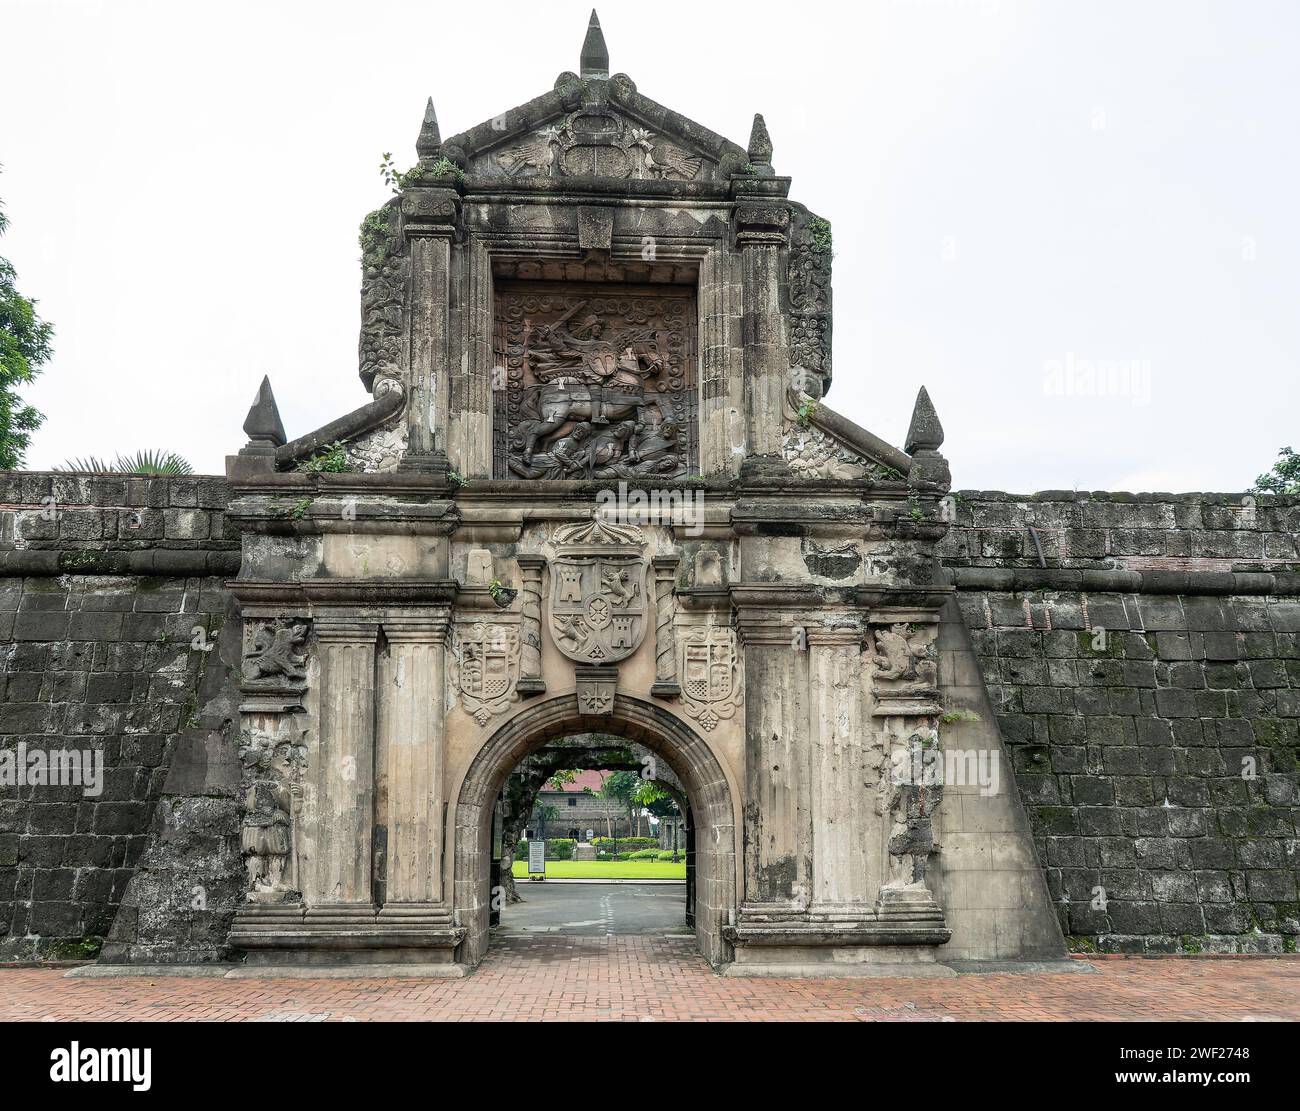 The main gate of Fort Santiago at Intramuros, Manila, Philippines, with the relief of Santiago, Saint James in English, over the entrance. Stock Photo